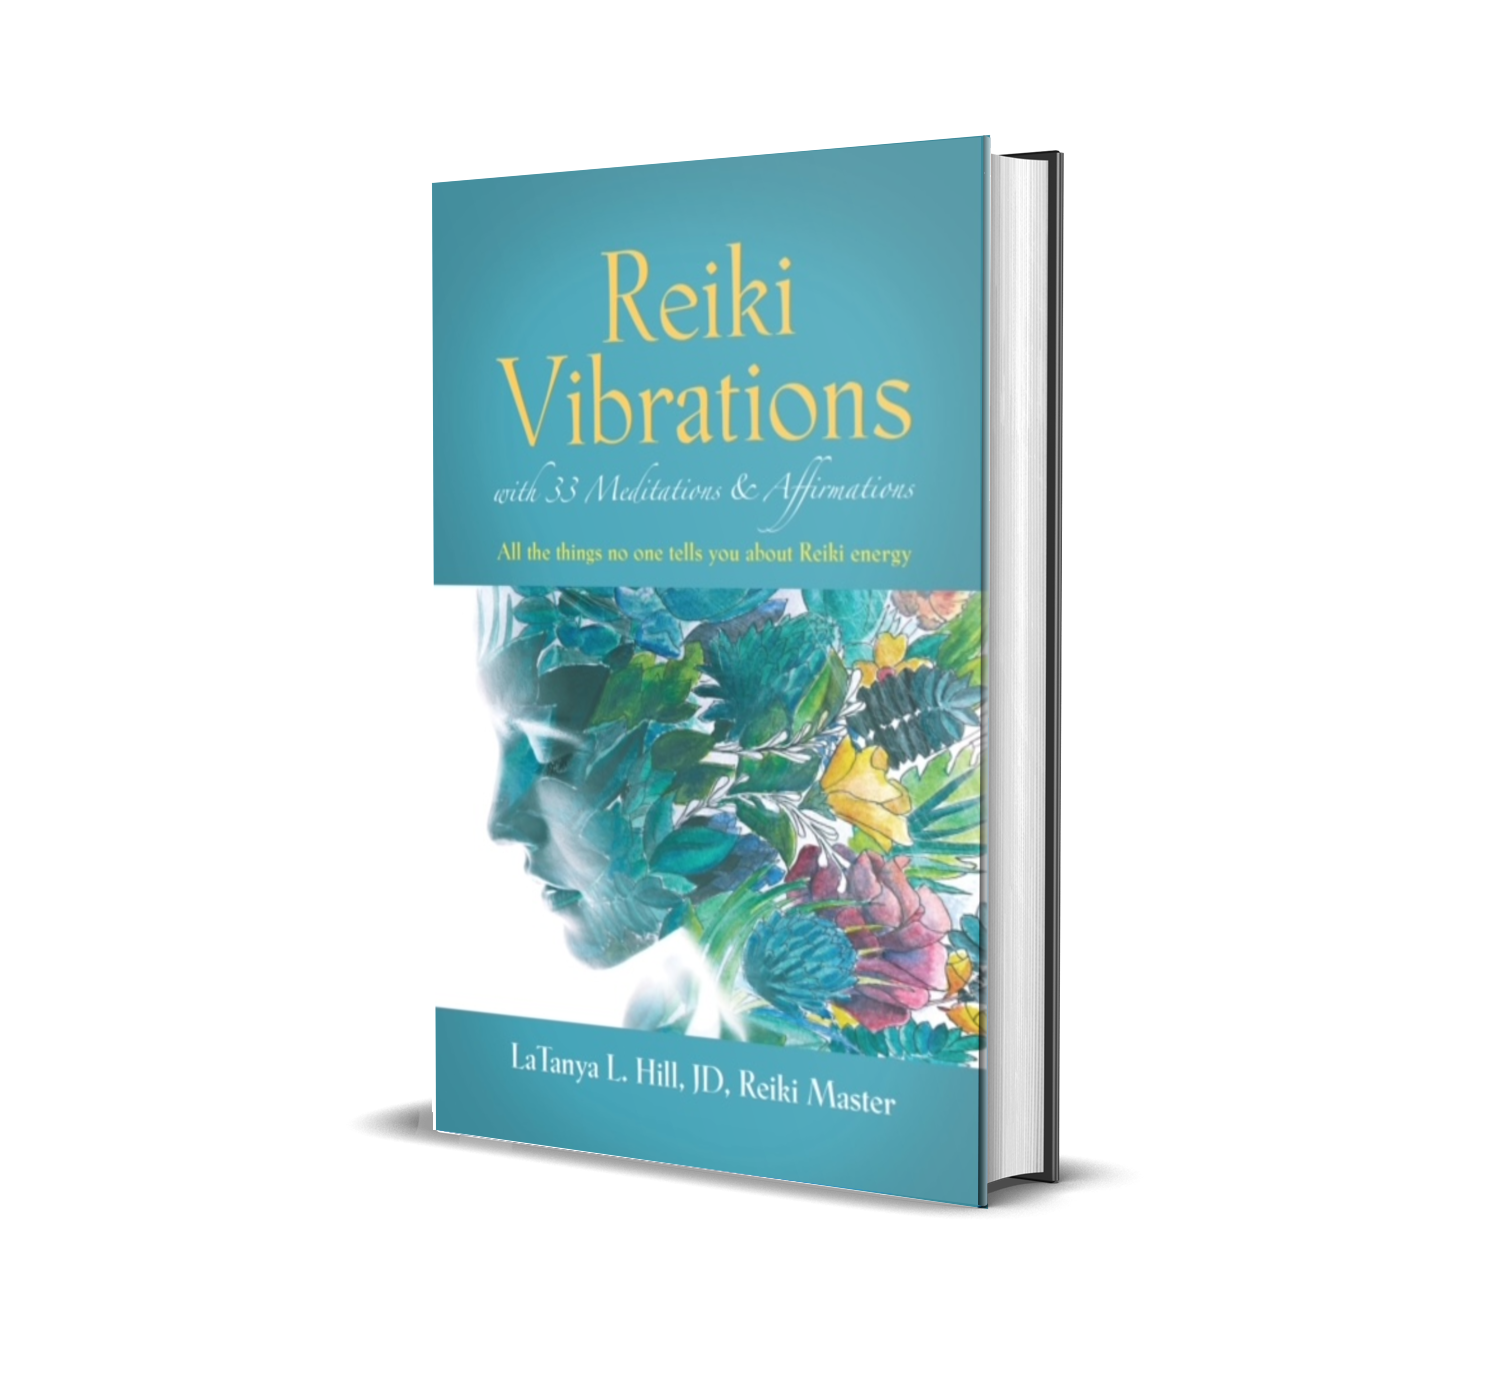 Reiki Vibrations with 33 Meditations and Affirmations